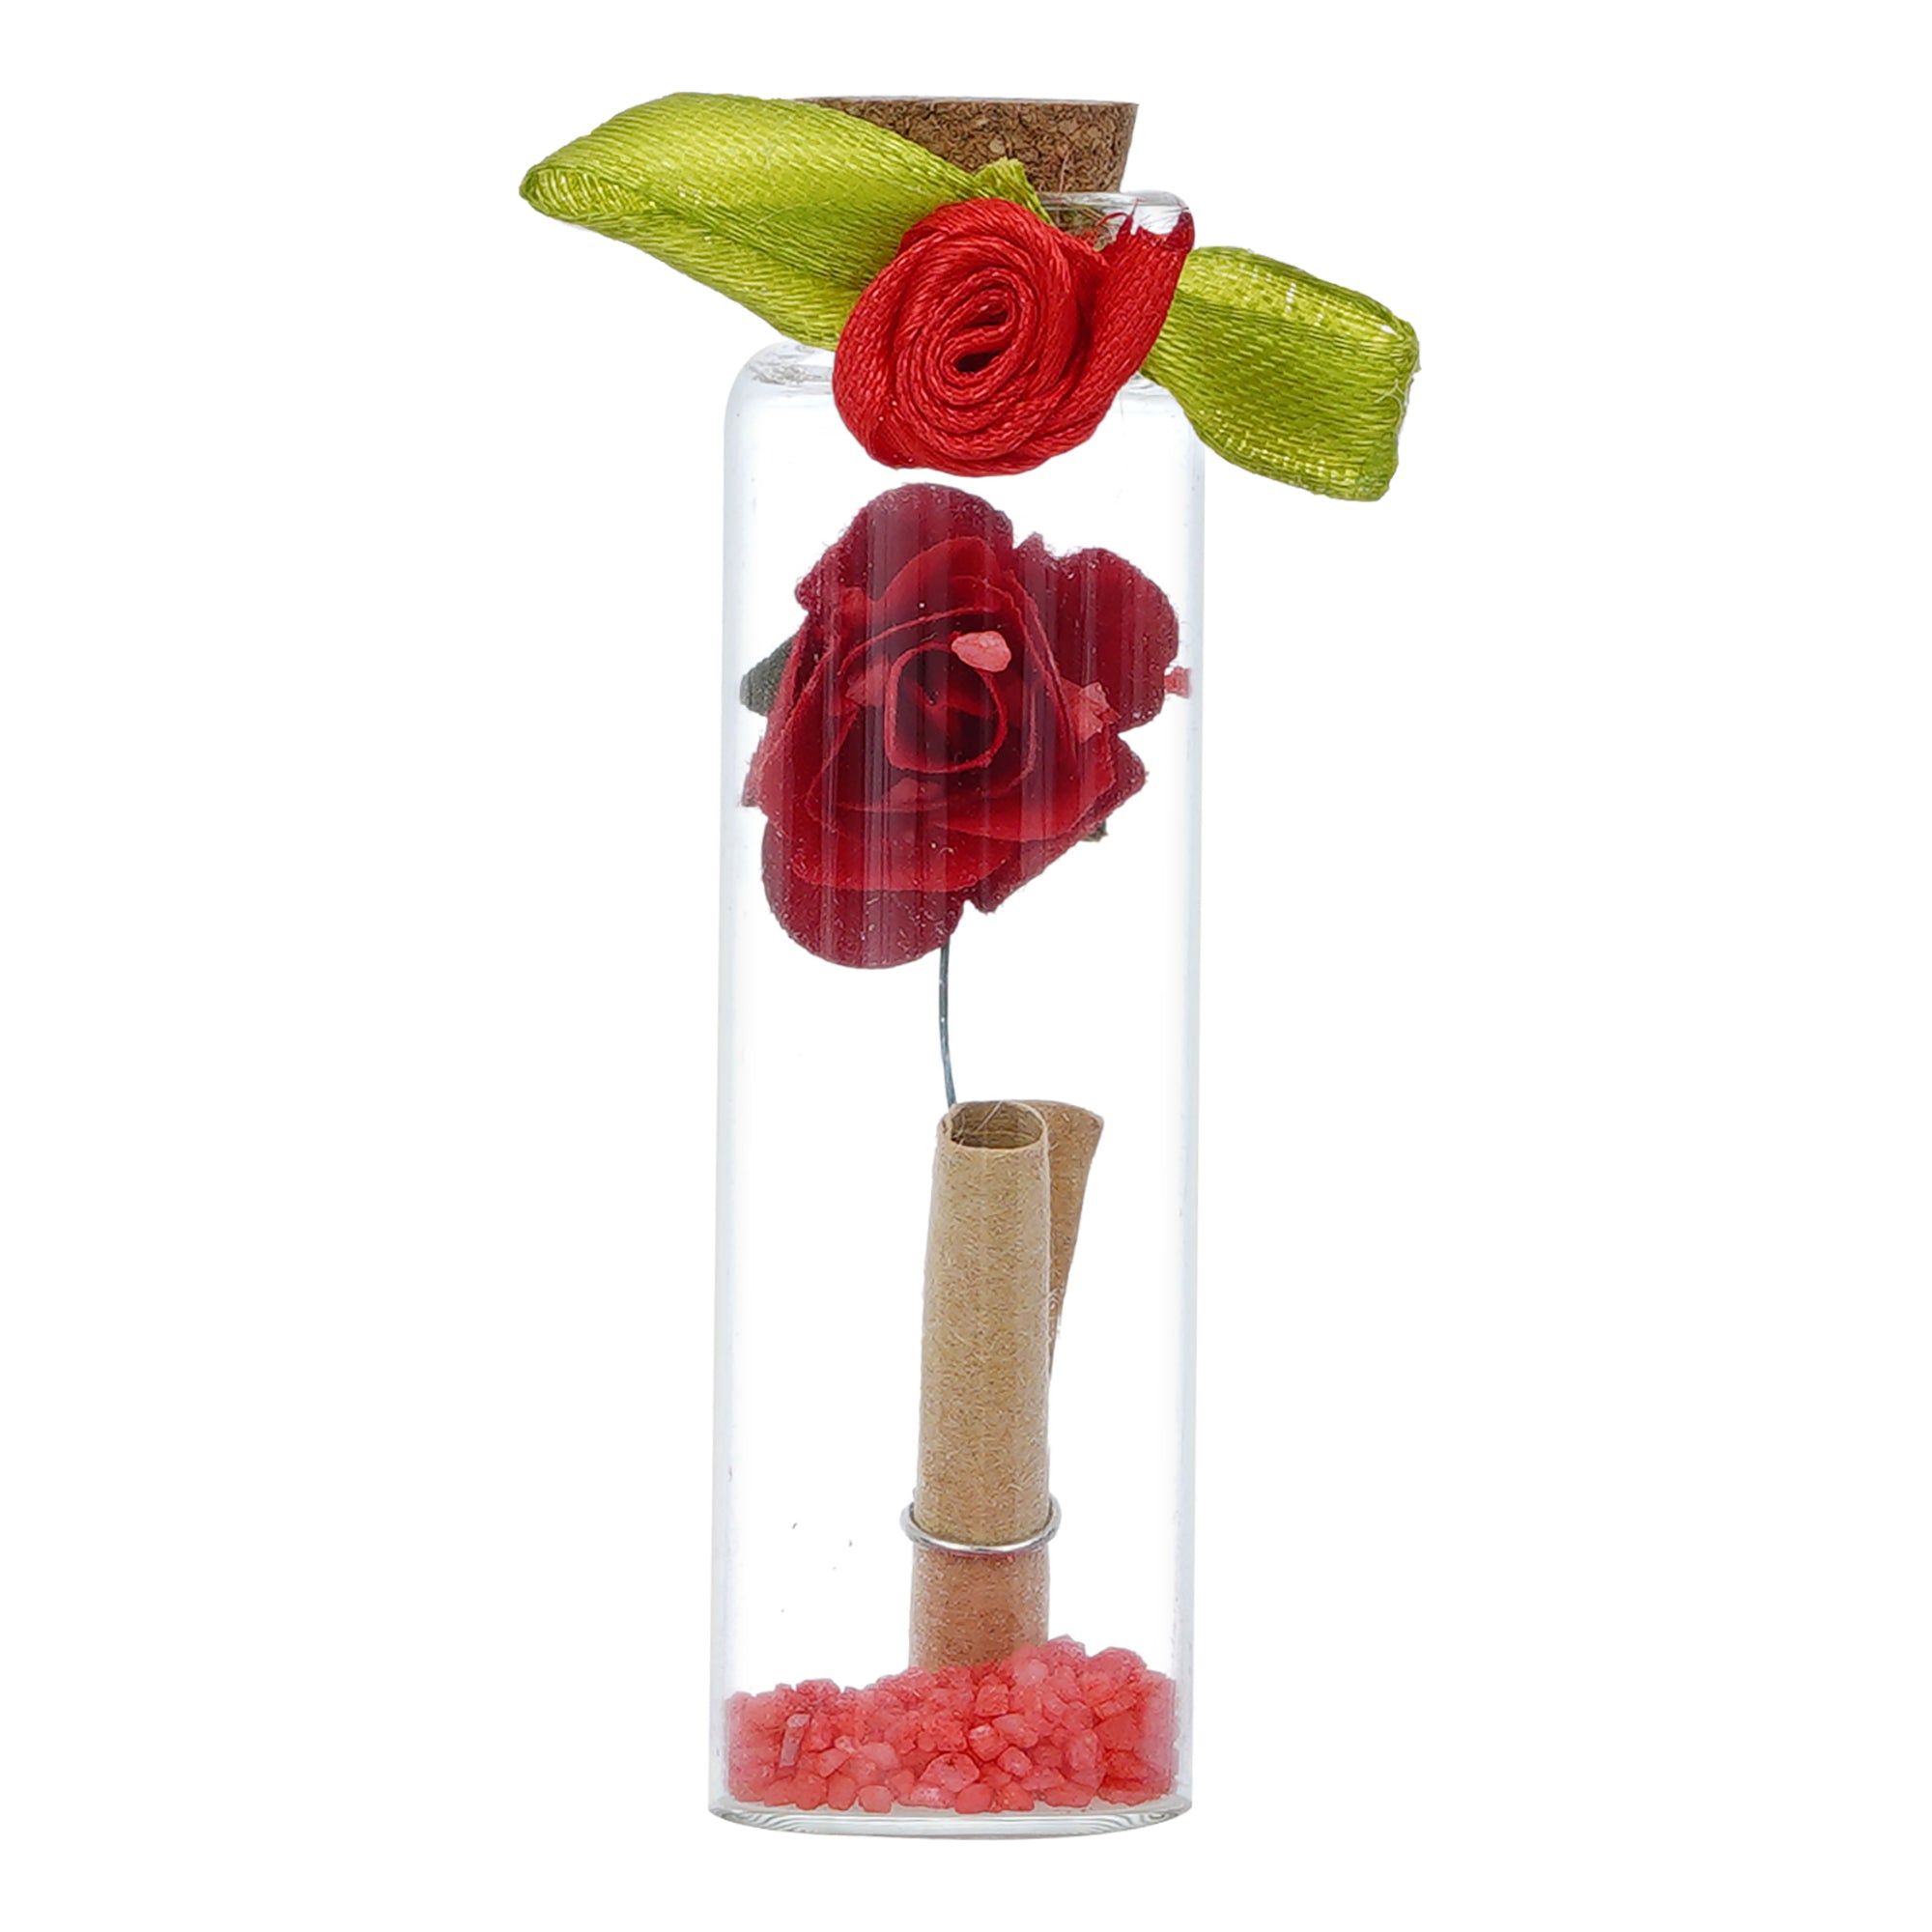 Set Of 6 Personal Messages Greeting Bottles In Wooden Box "For You" Red Decorative Bottle 6